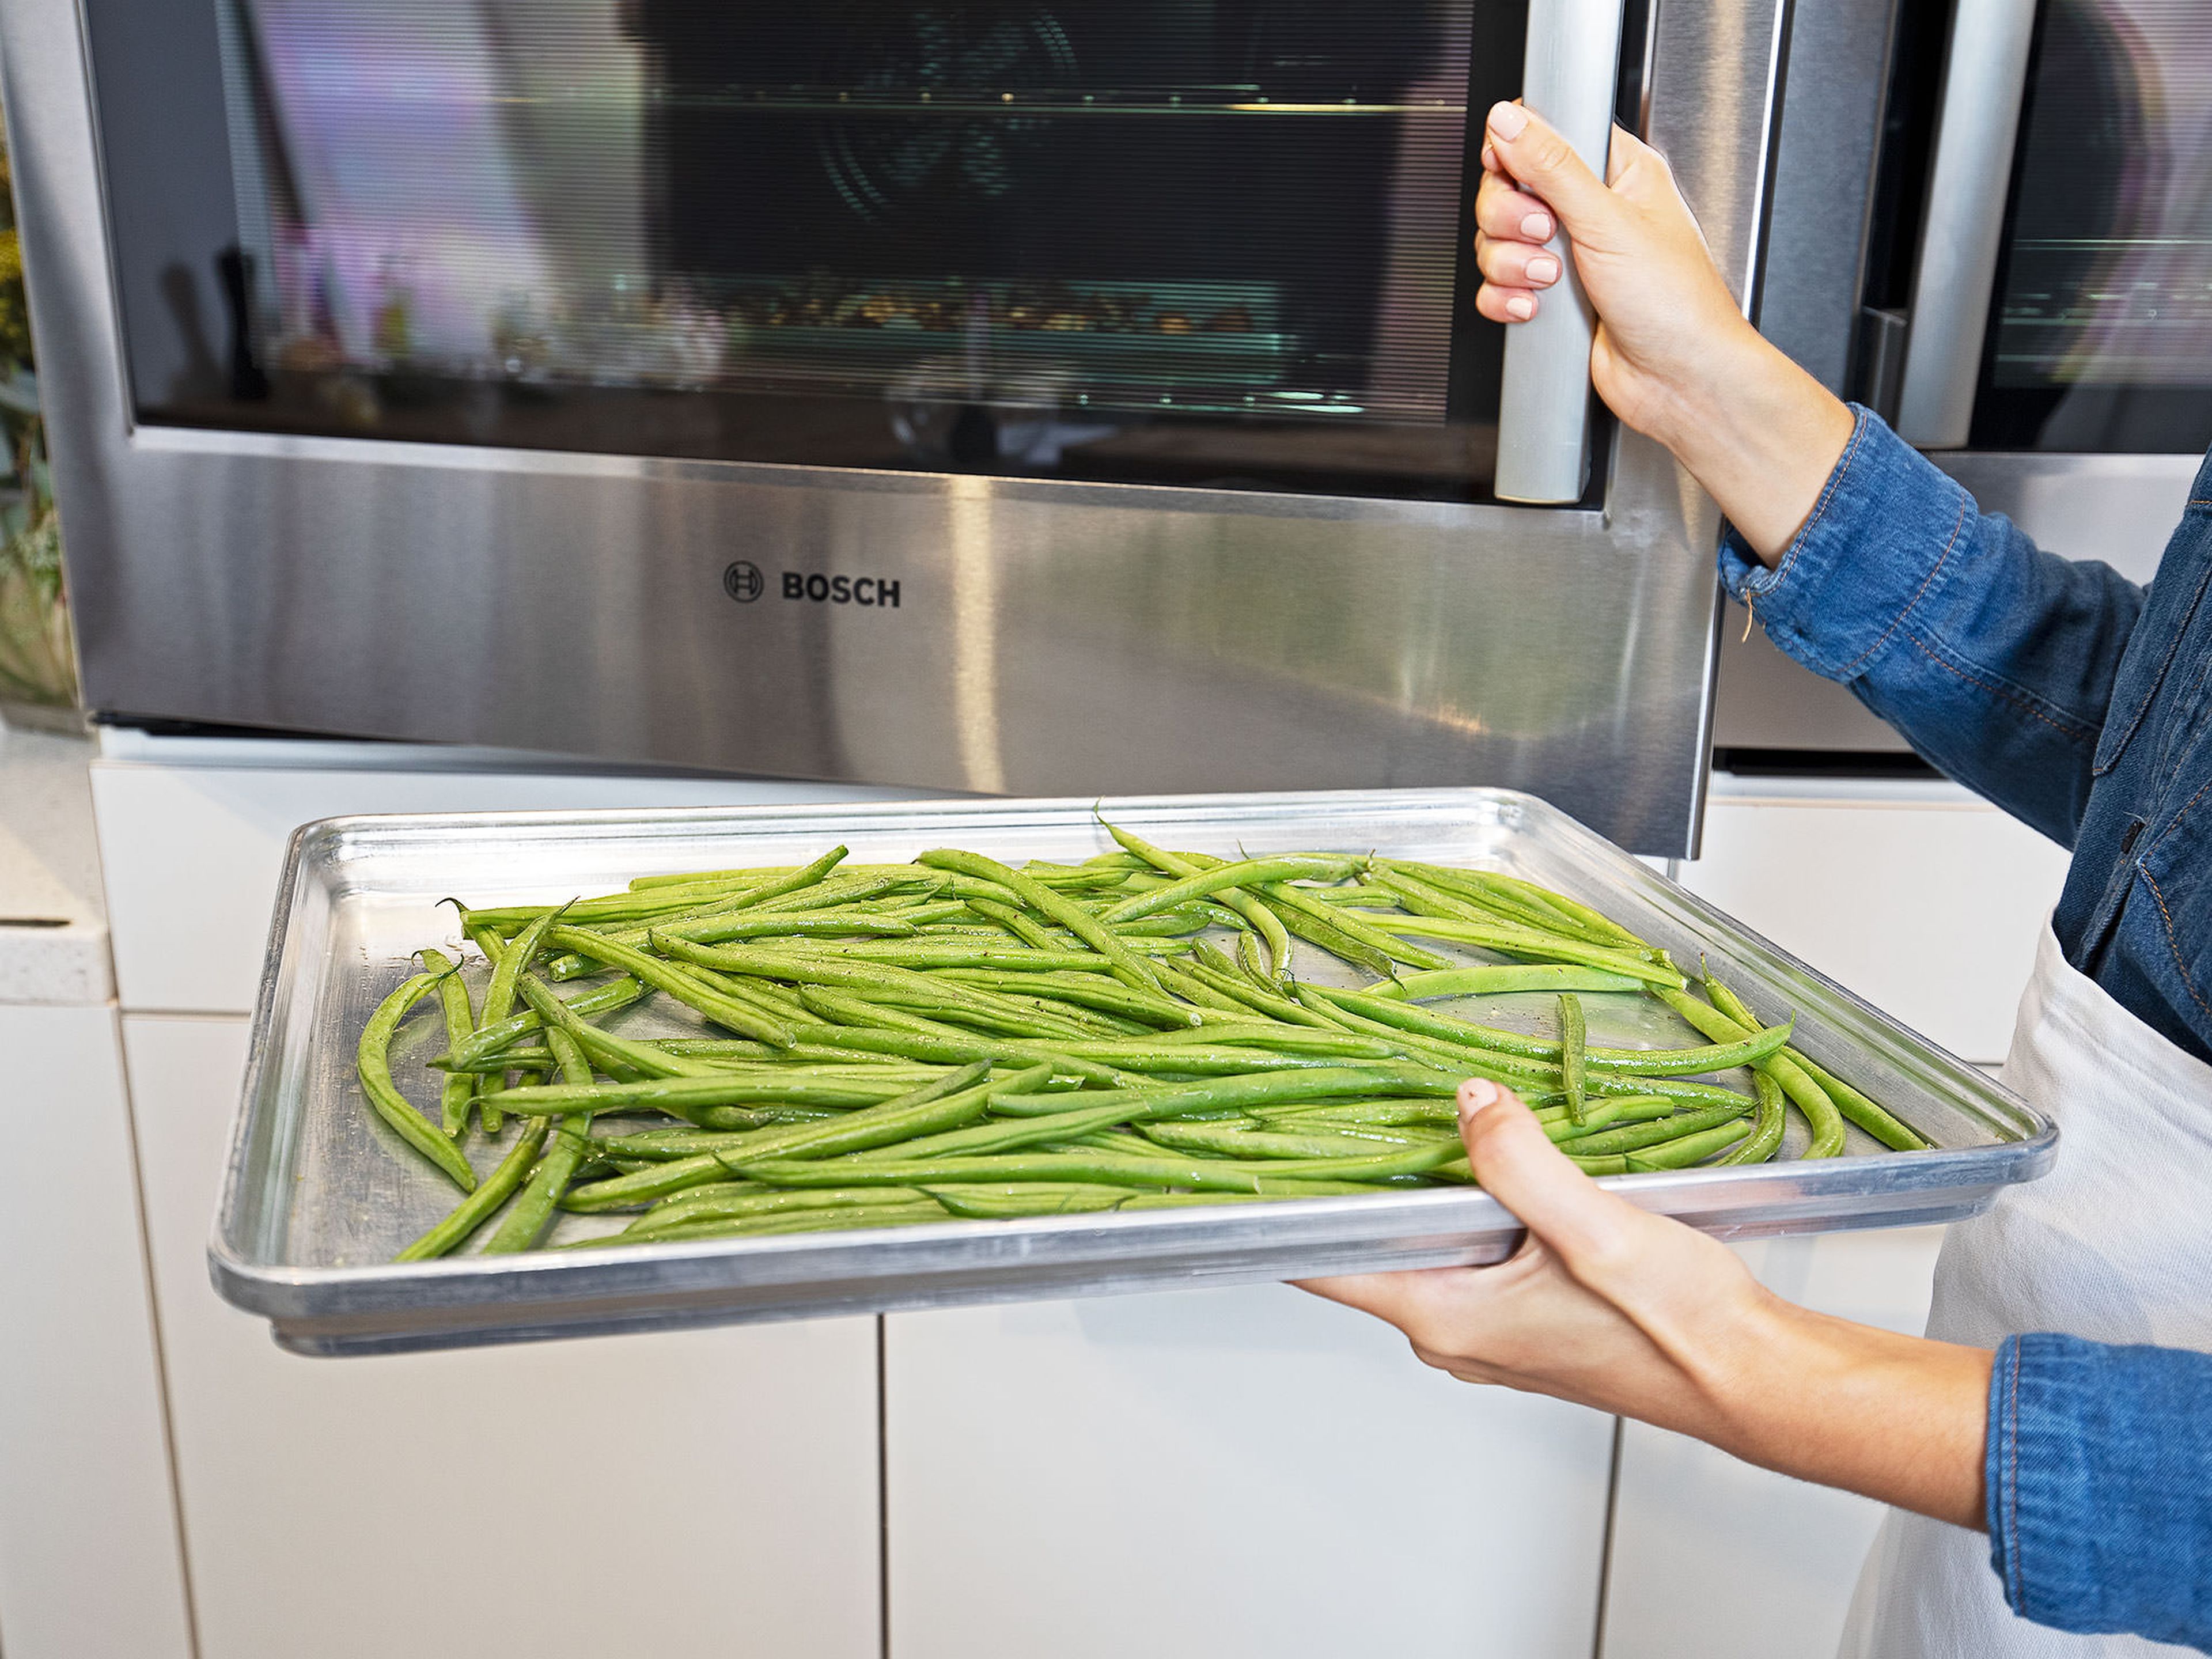 Preheat oven to 375°F/190°C, convection. Trim green beans, if needed, and transfer to a baking sheet. Clean mushrooms, halve, then transfer to a separate baking sheet. Toss both the green beans and mushrooms with olive oil, salt, and pepper. Spread them into an even layer and transfer to the oven. Bake the mushrooms for approx. 15 min. then drain any liquid off and return to the oven for another 15 min. The green beans can bake the whole 30 min.